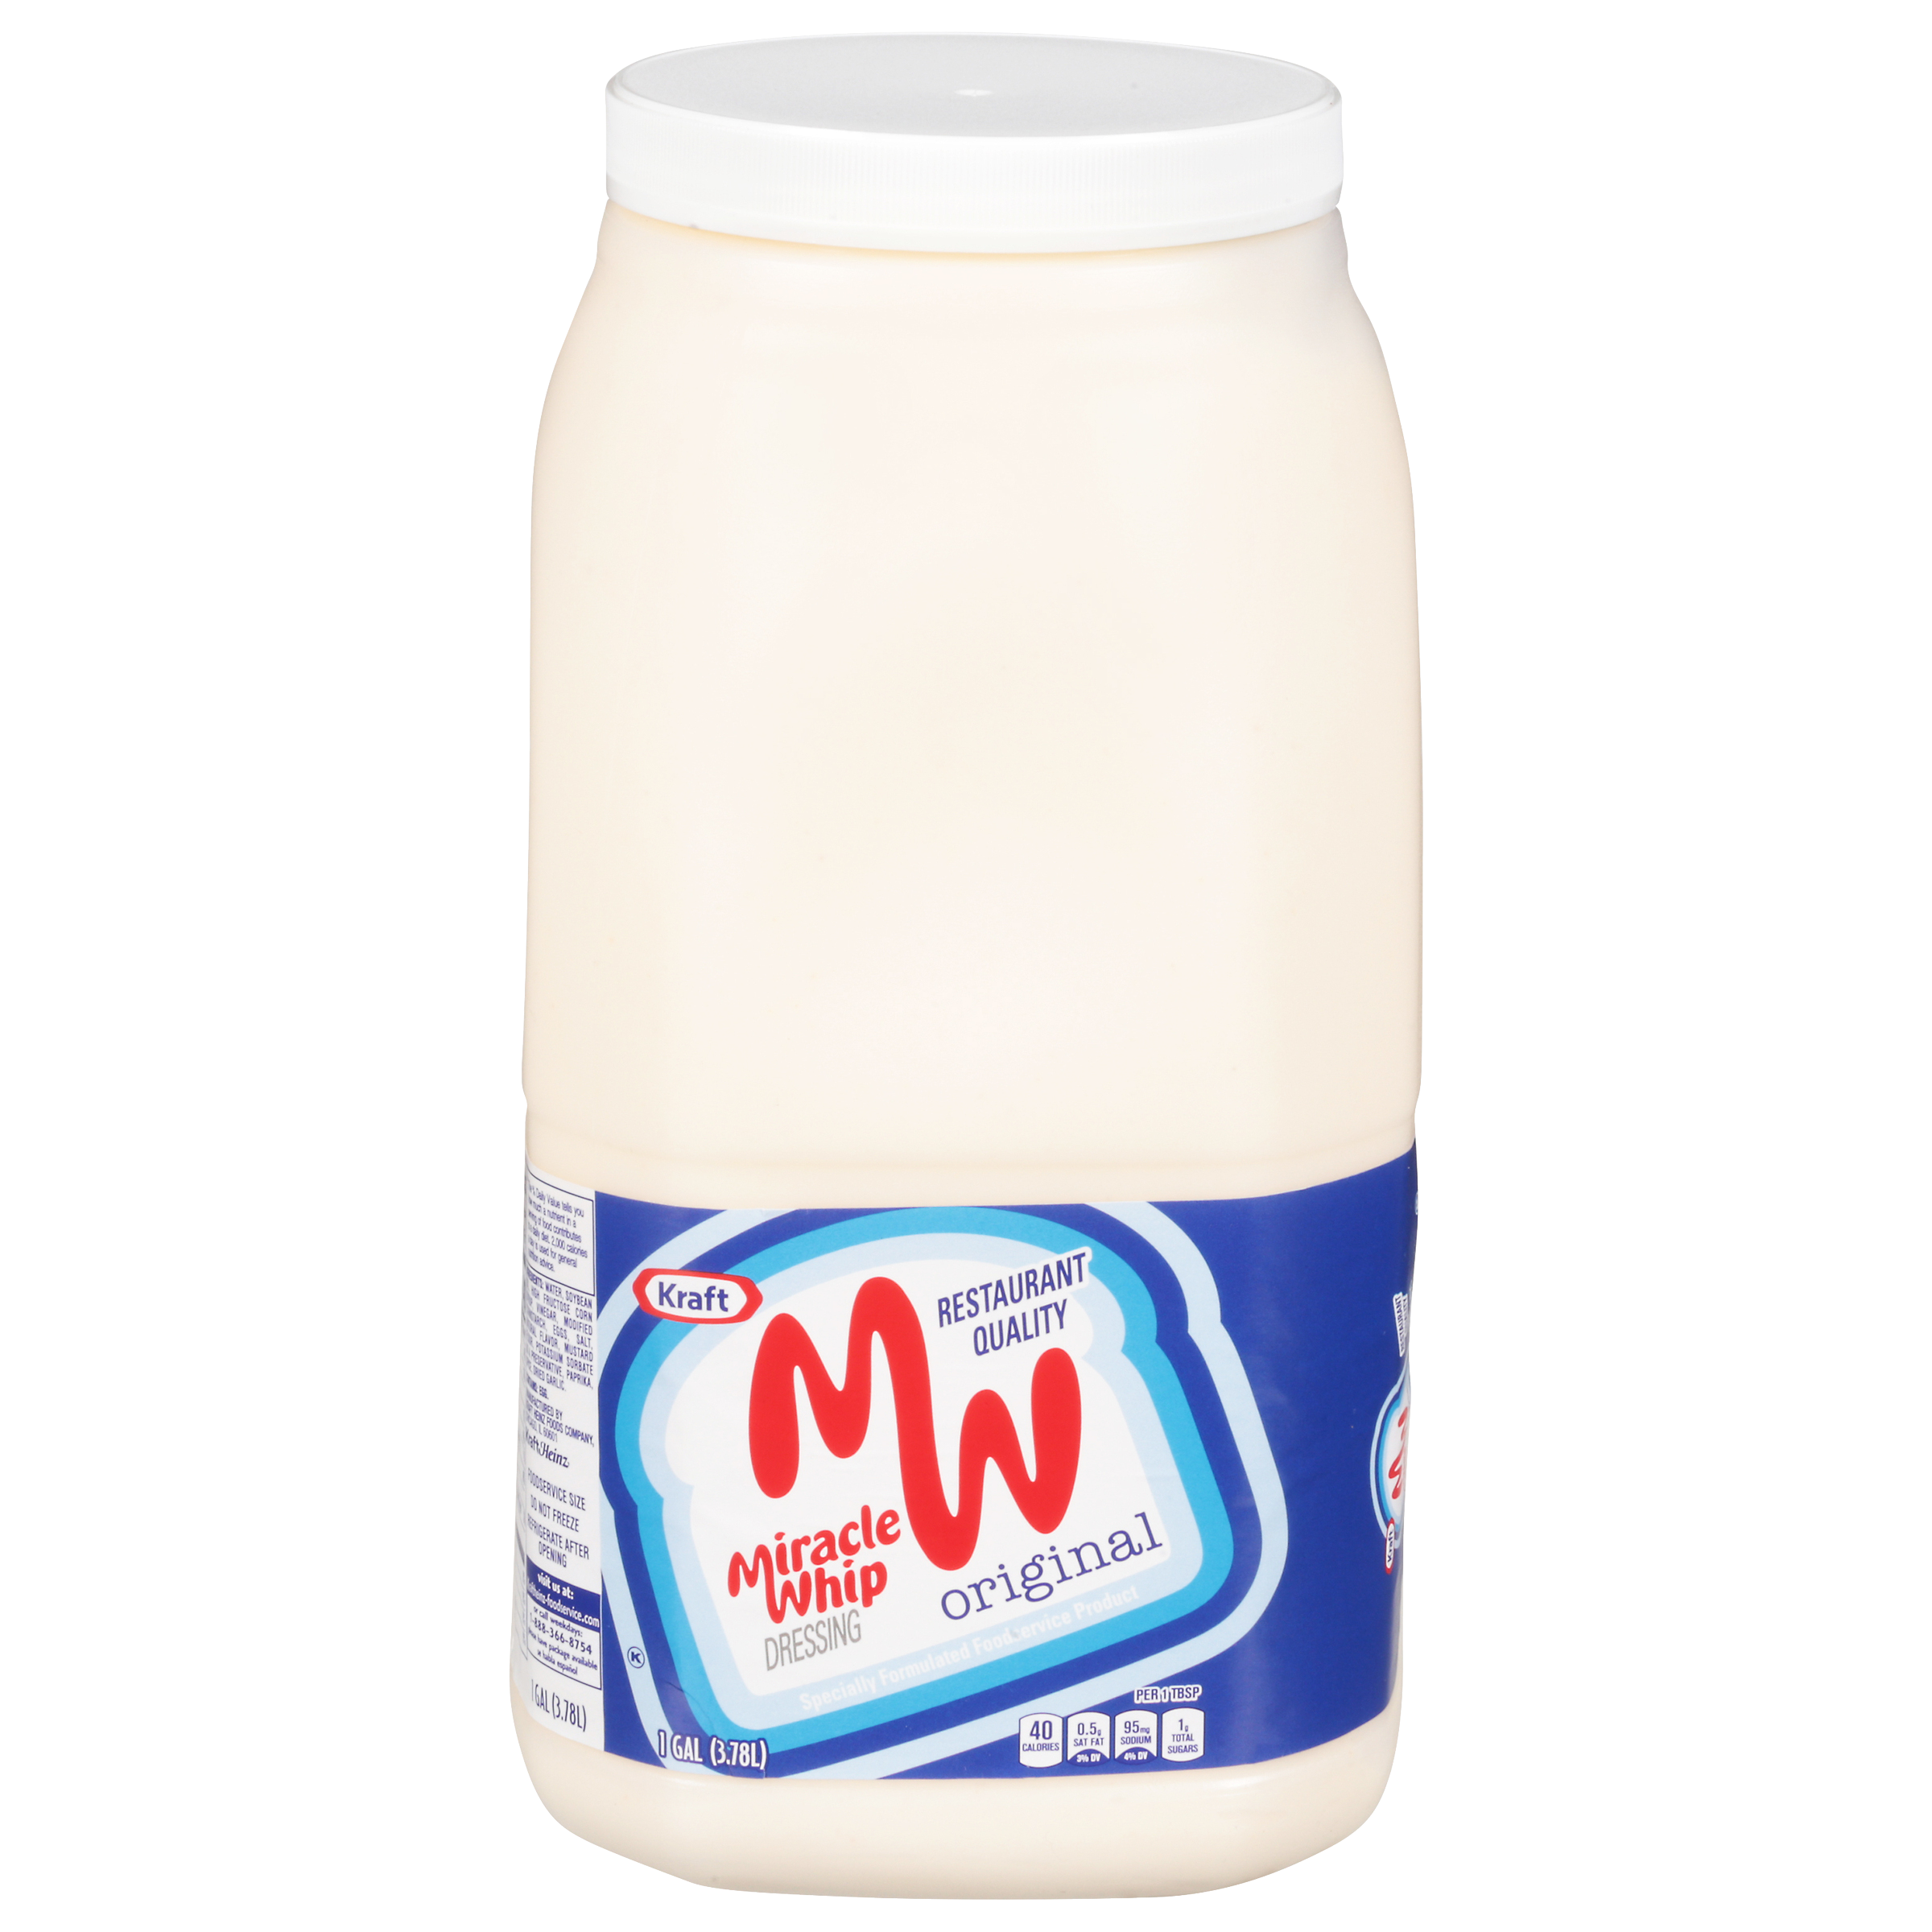 Miracle Whip Original Restaurant Quality Dressing, 4 ct Casepack, 1 gal Jugs